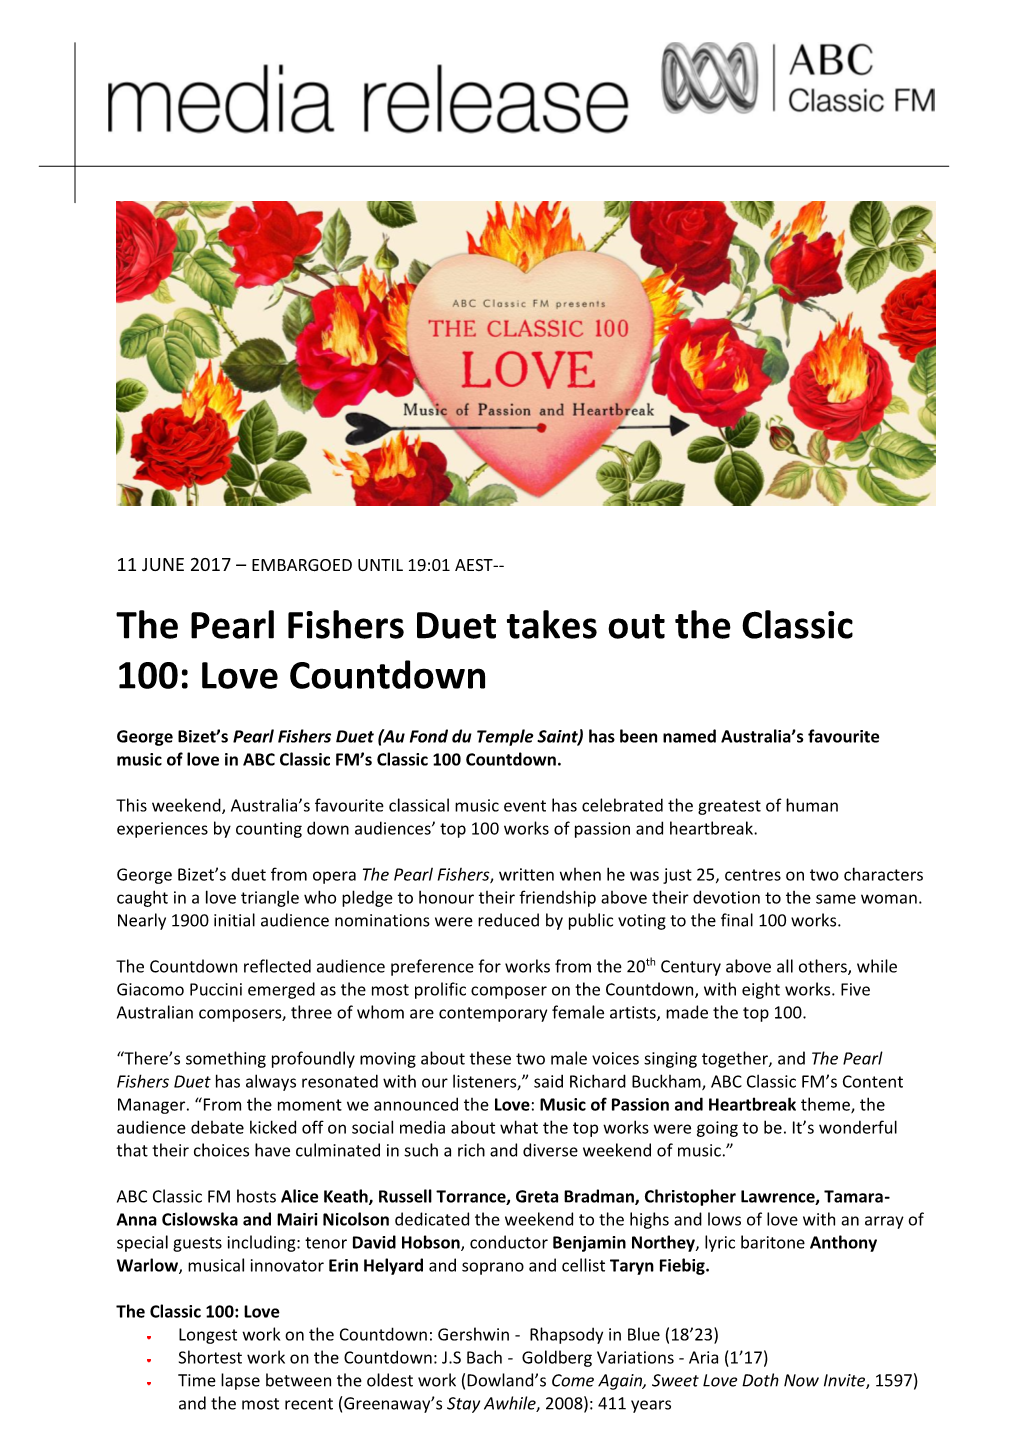 The Pearl Fishers Duet Takes out the Classic 100: Love Countdown